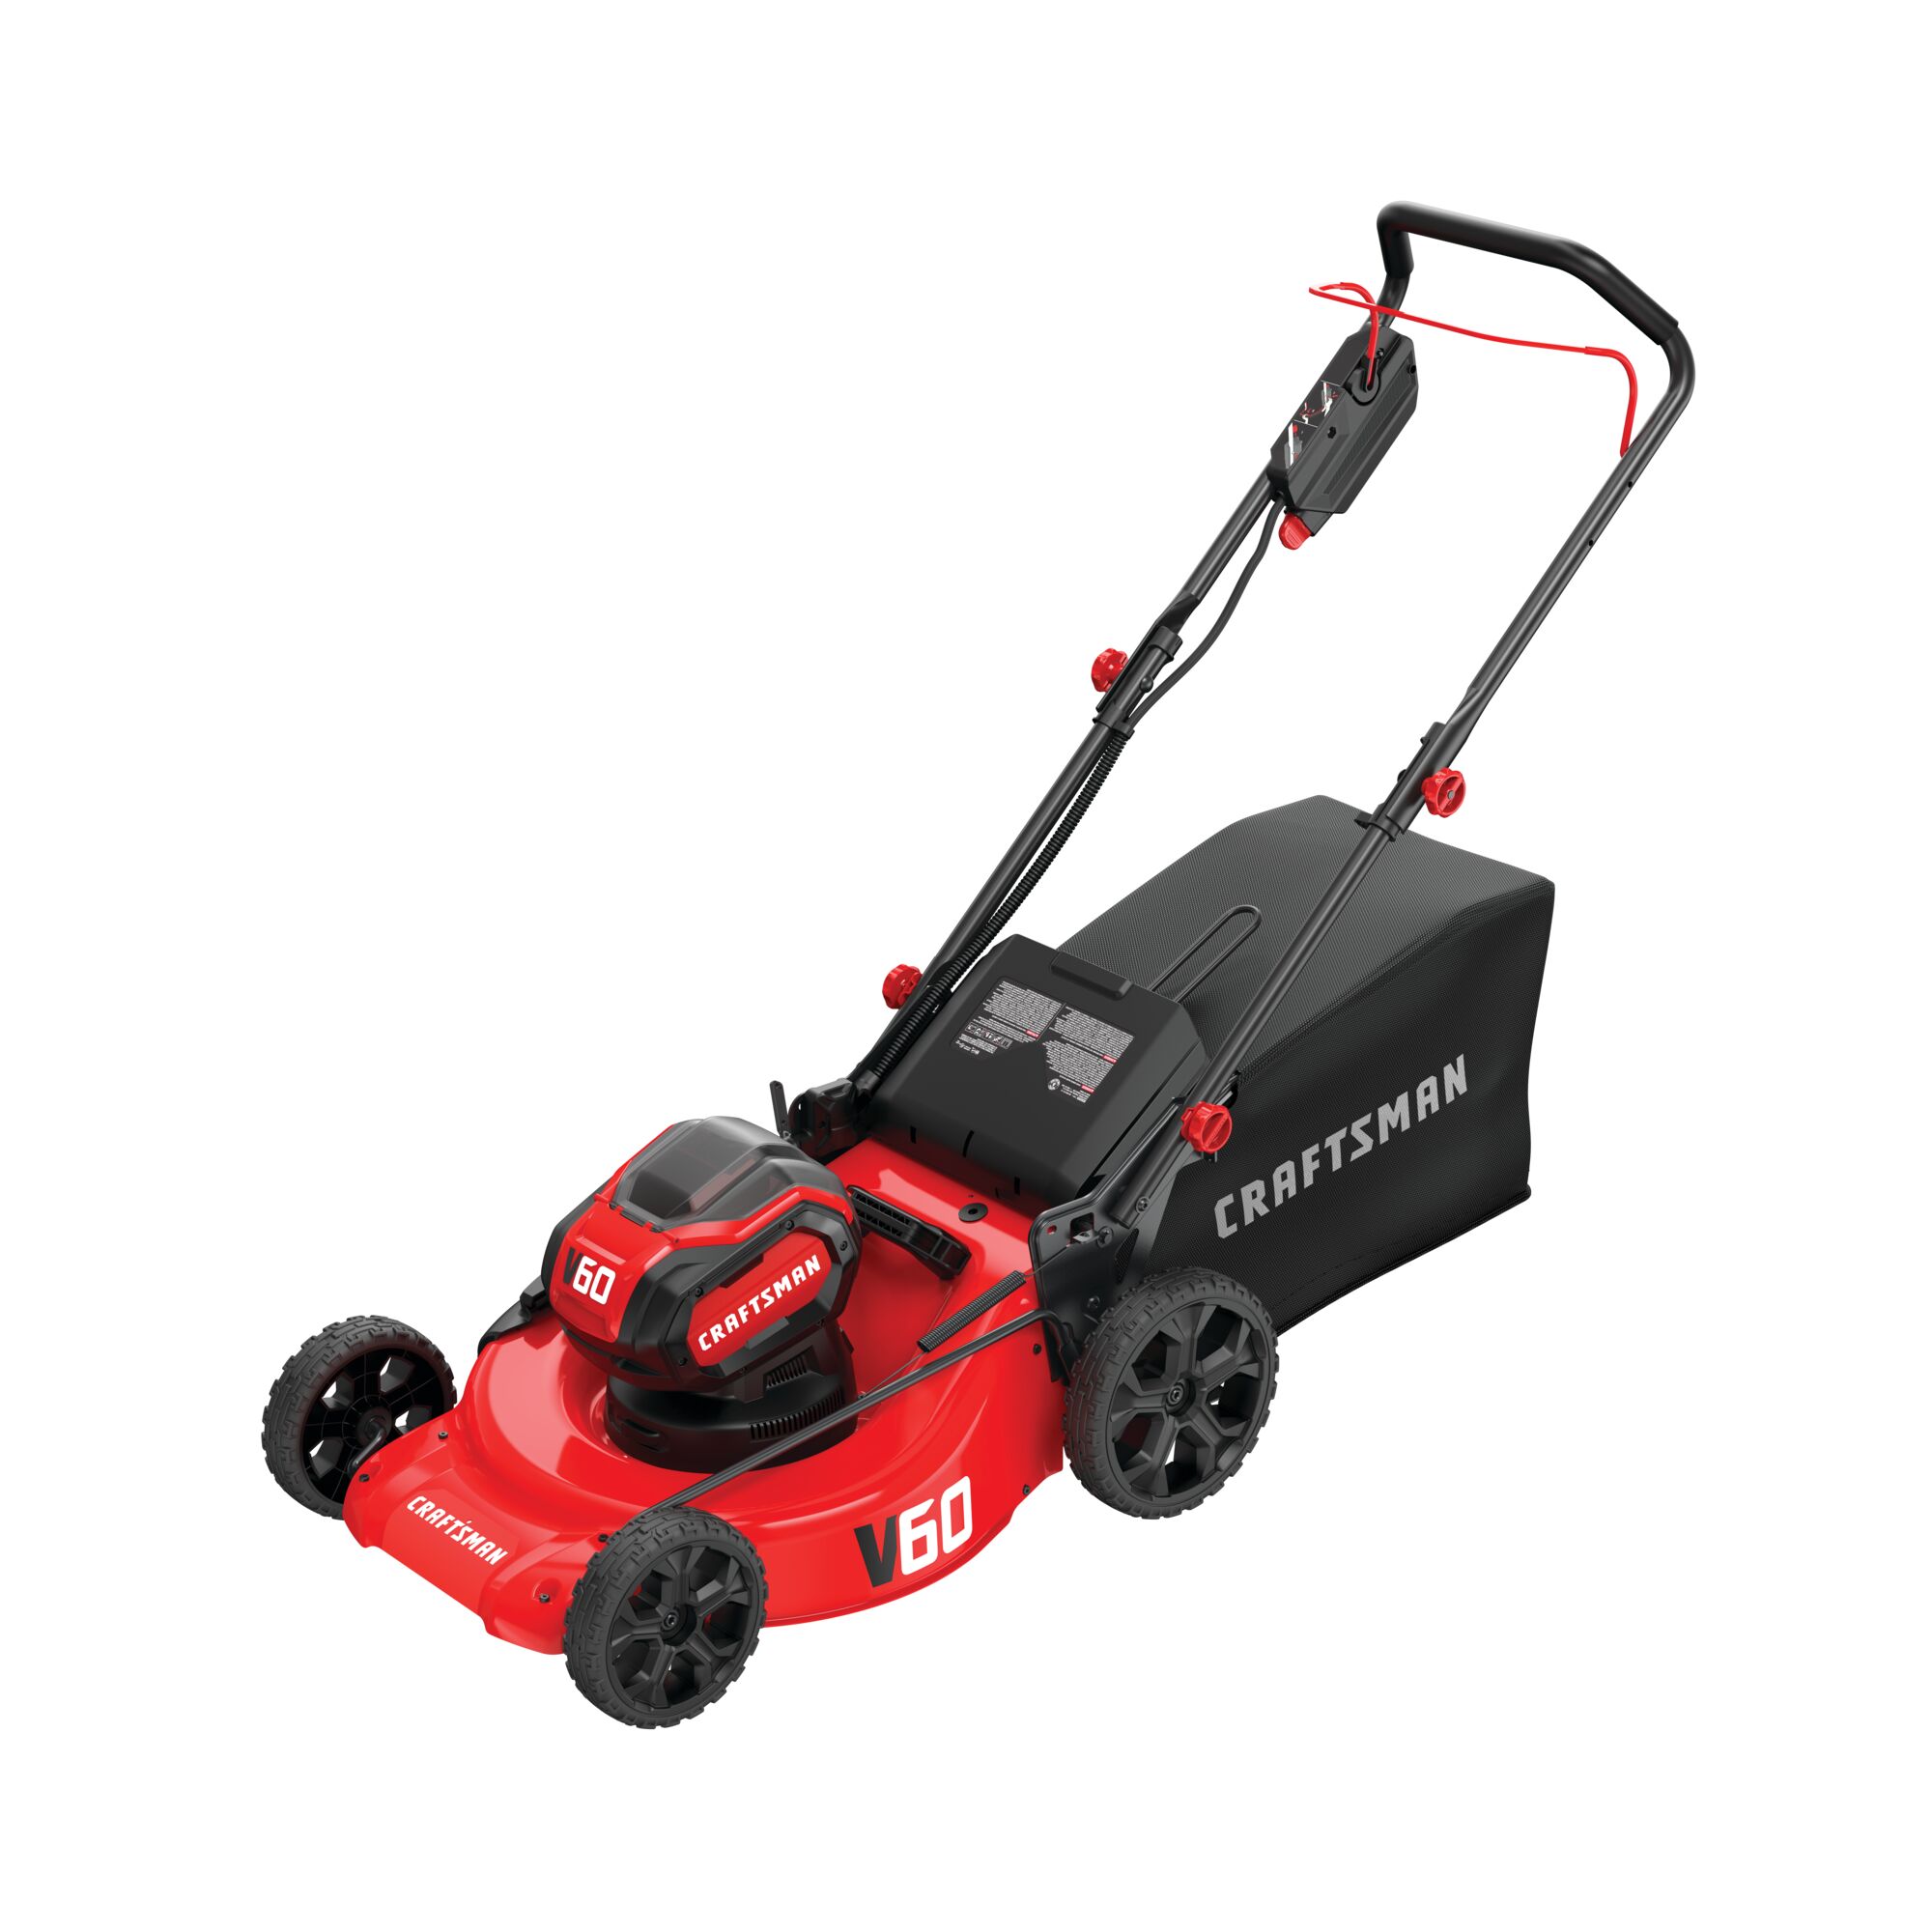 Cordless 21 inch 3 in 1 lawn mower kit 5 amp hour.